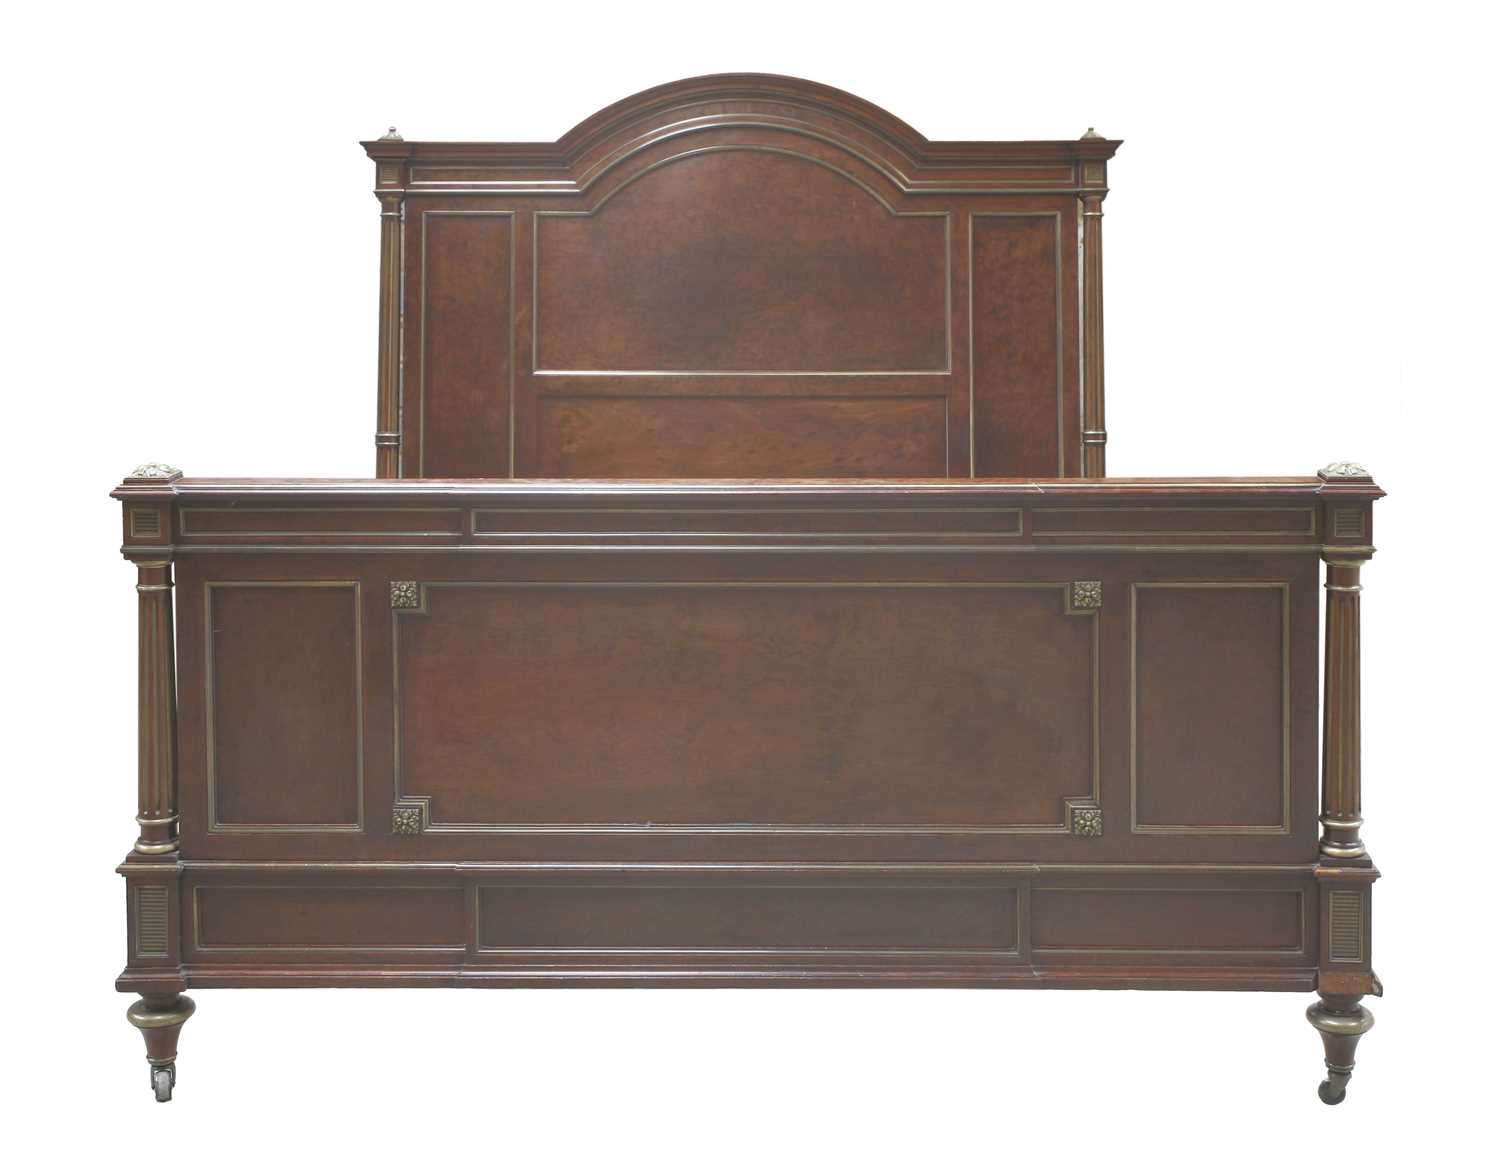 Lot 221 - A French plum pudding mahogany double bed